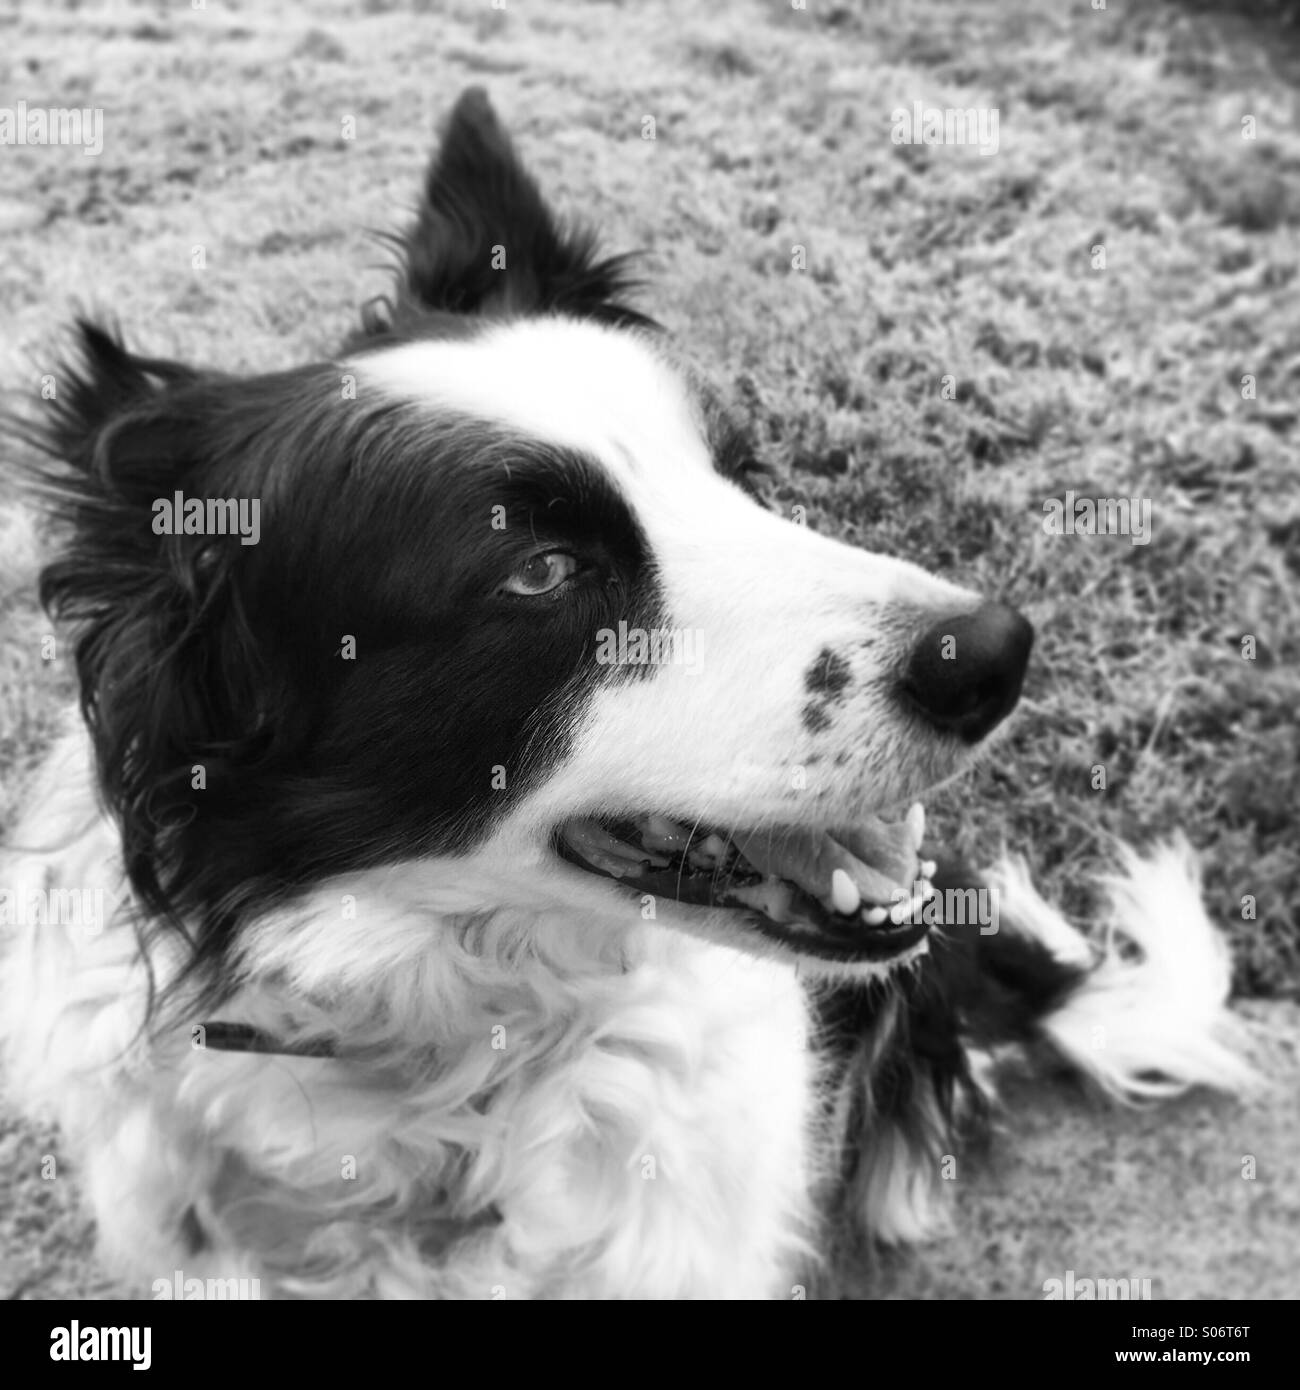 Border Collie portrait with black and white Instagram filter Stock Photo